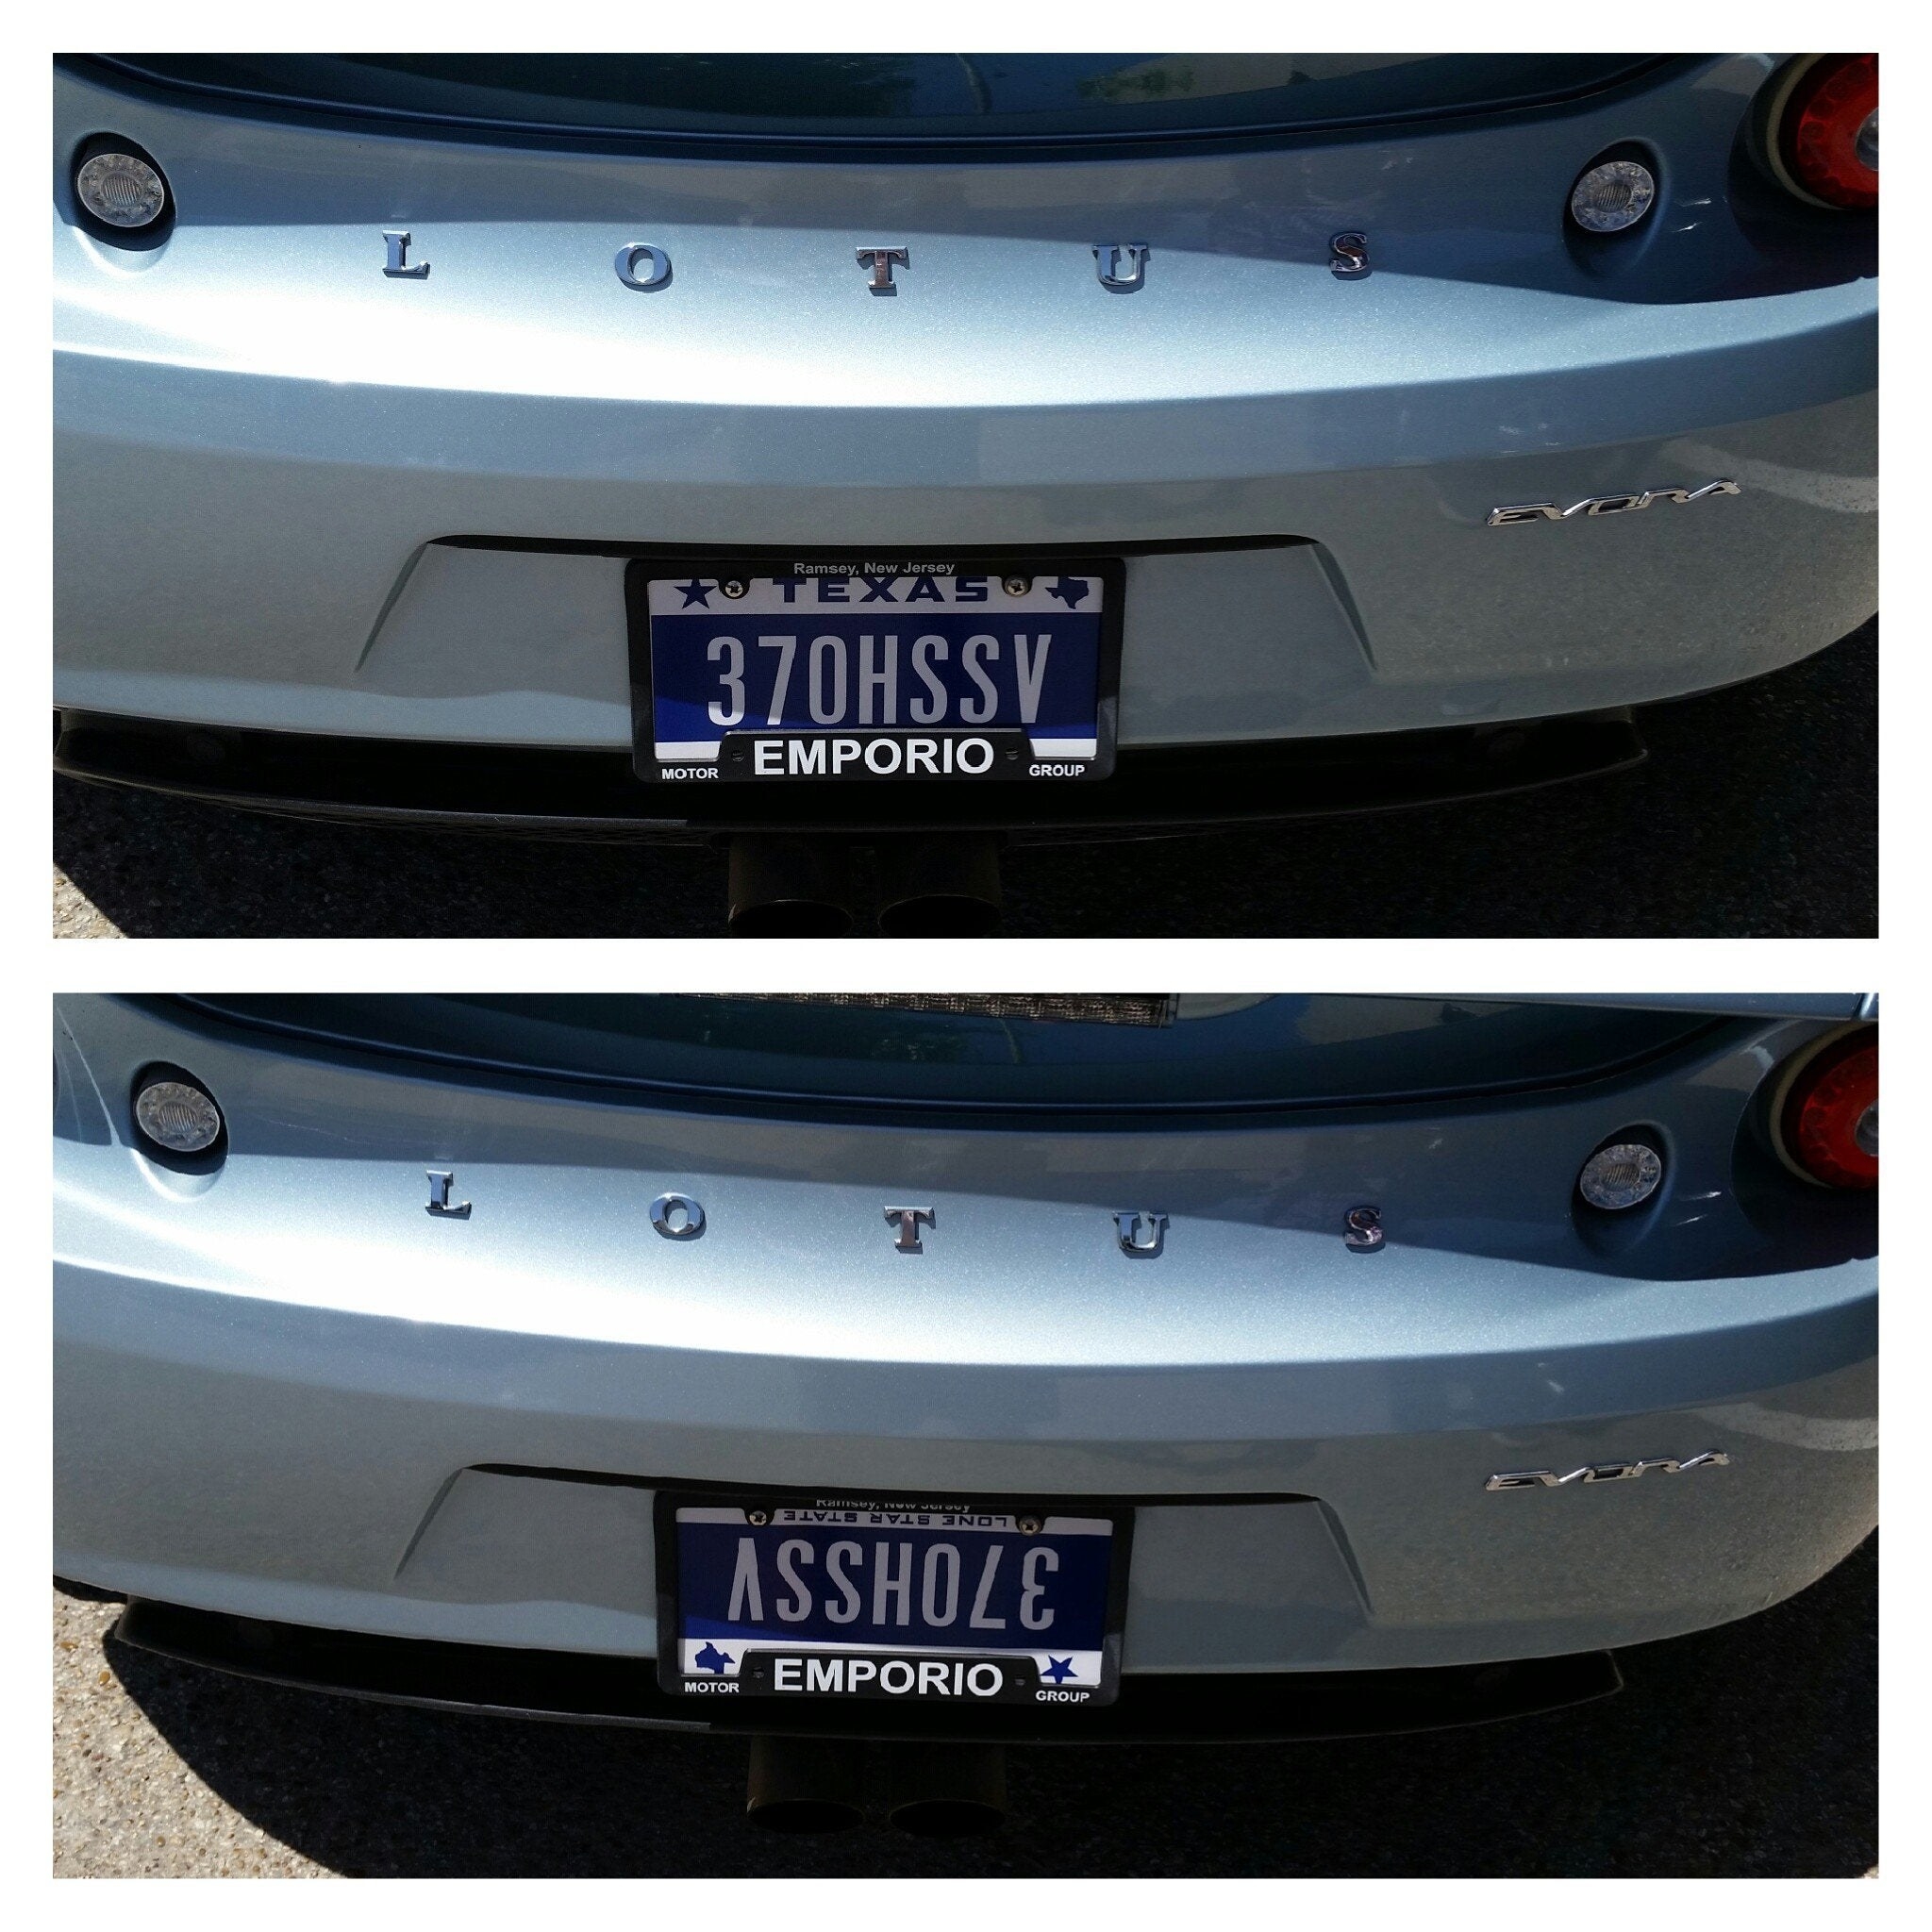 Car with license plate reading &quot;ASSHOLE&quot;